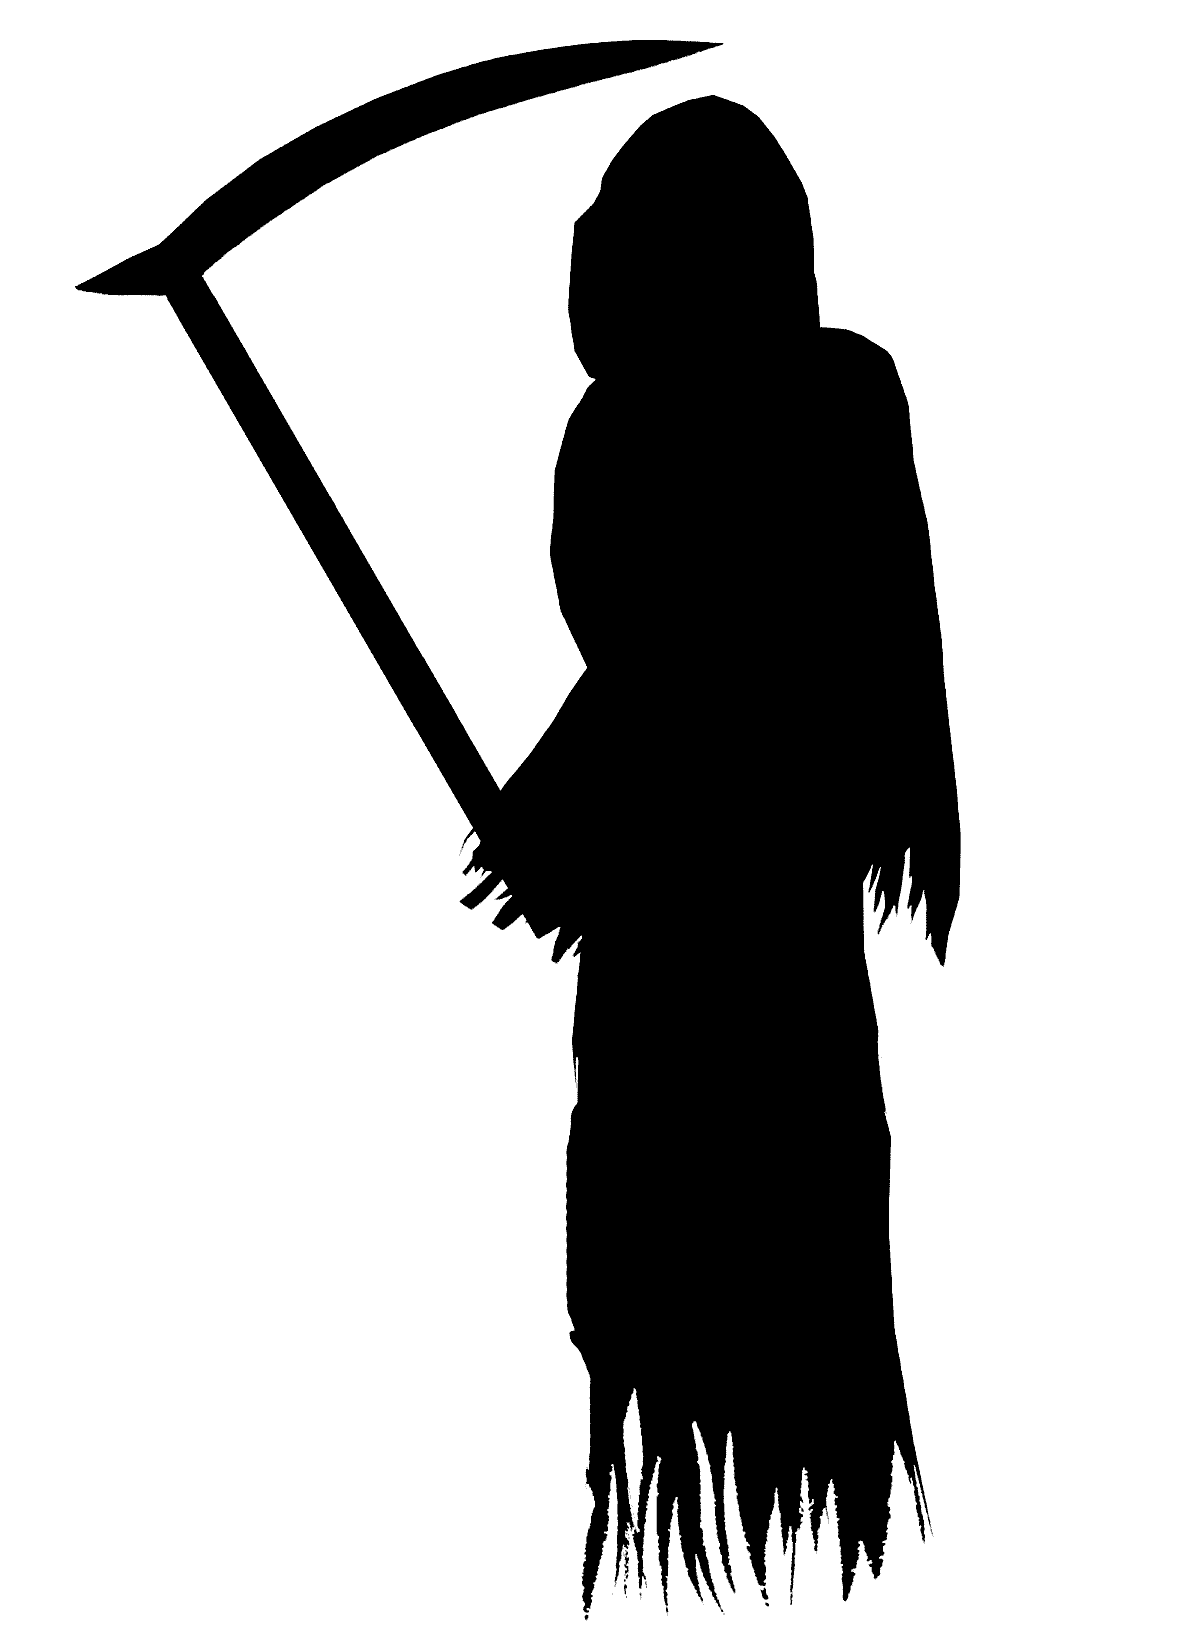 Grim Reaper Tattoo Designs, Ideas, and Meanings - TatRing